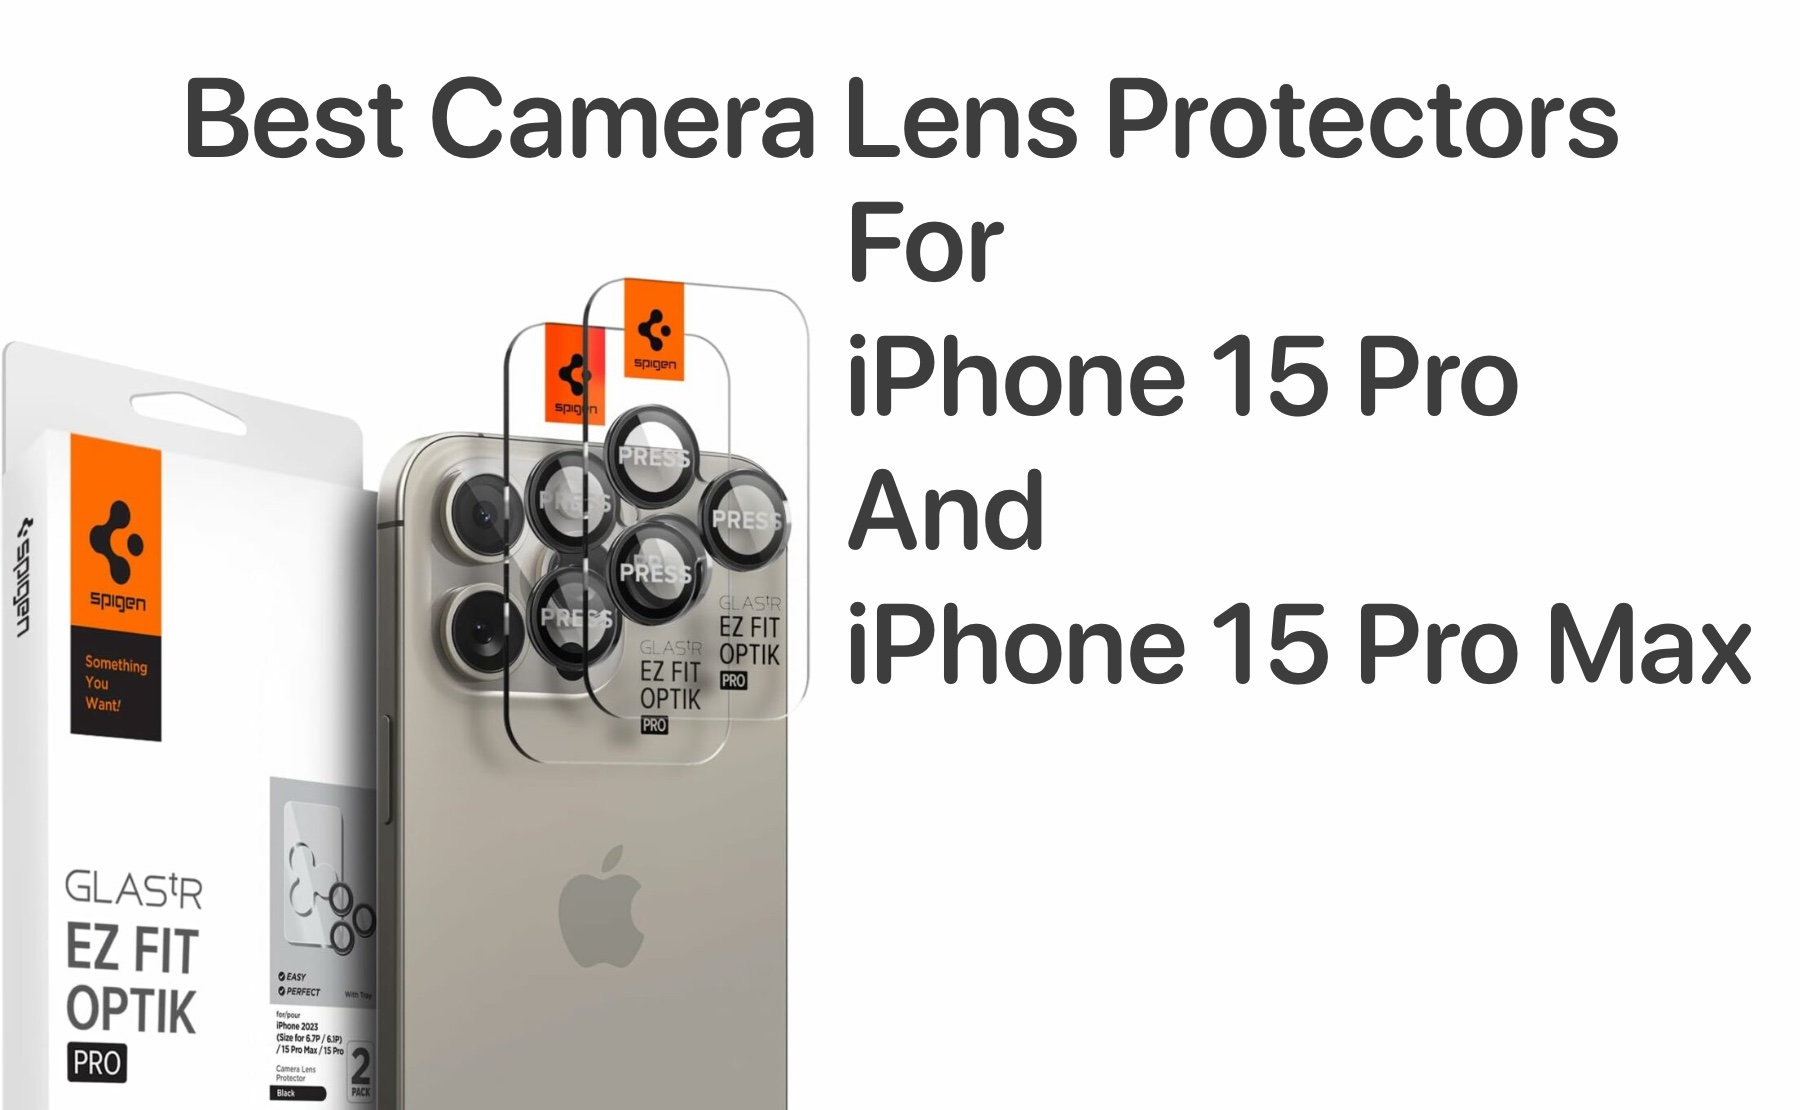 Best Camera Lens Protectors For iPhone 15 And iPhone 15 Pro Max - iOS Hacker